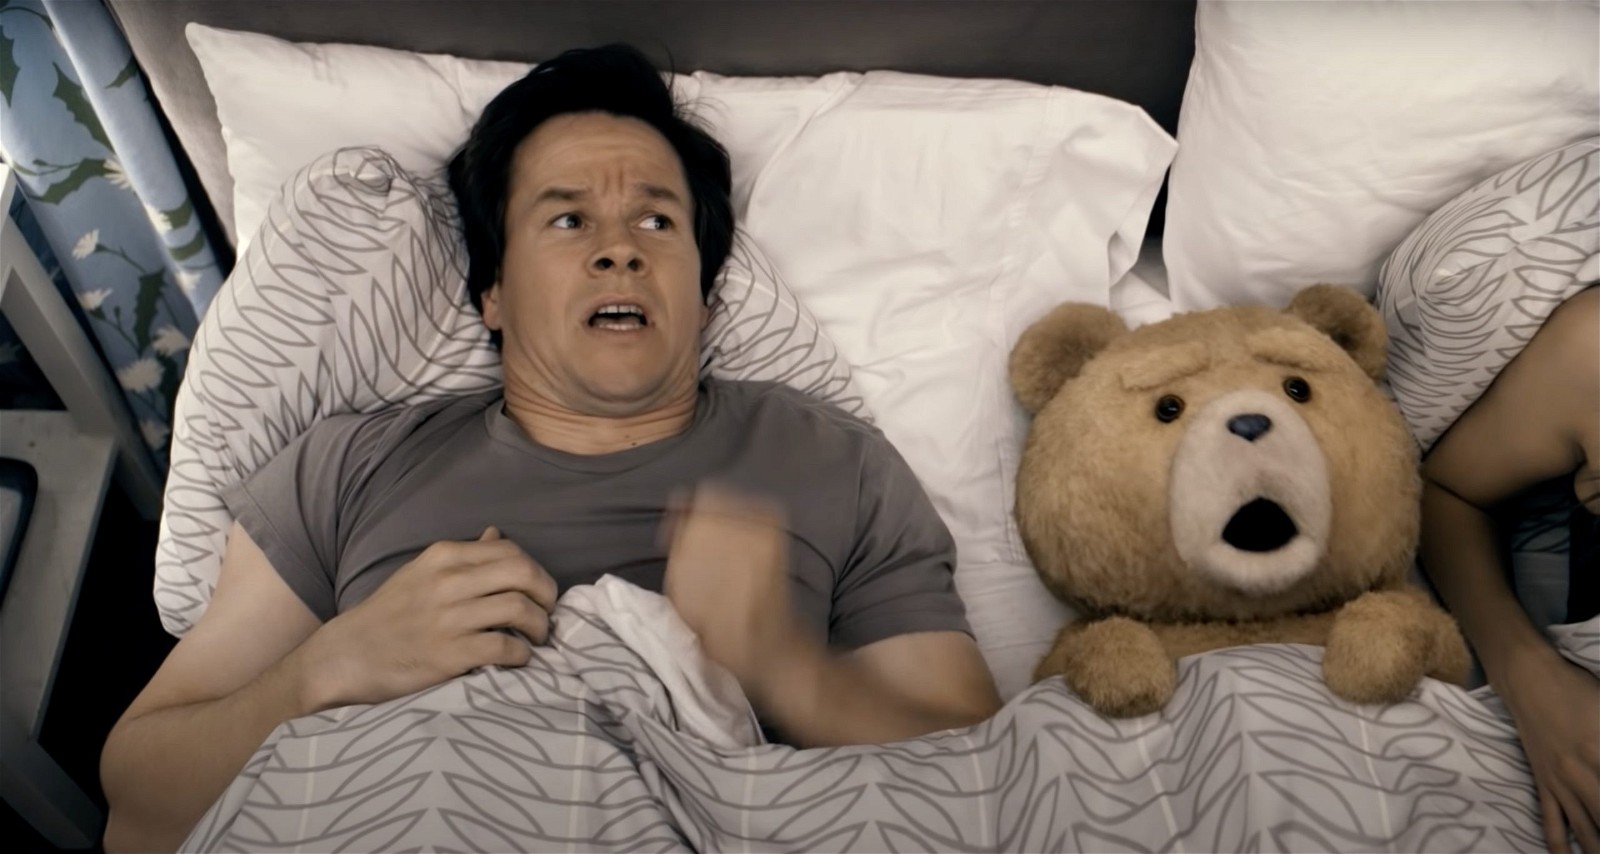 A still from Ted